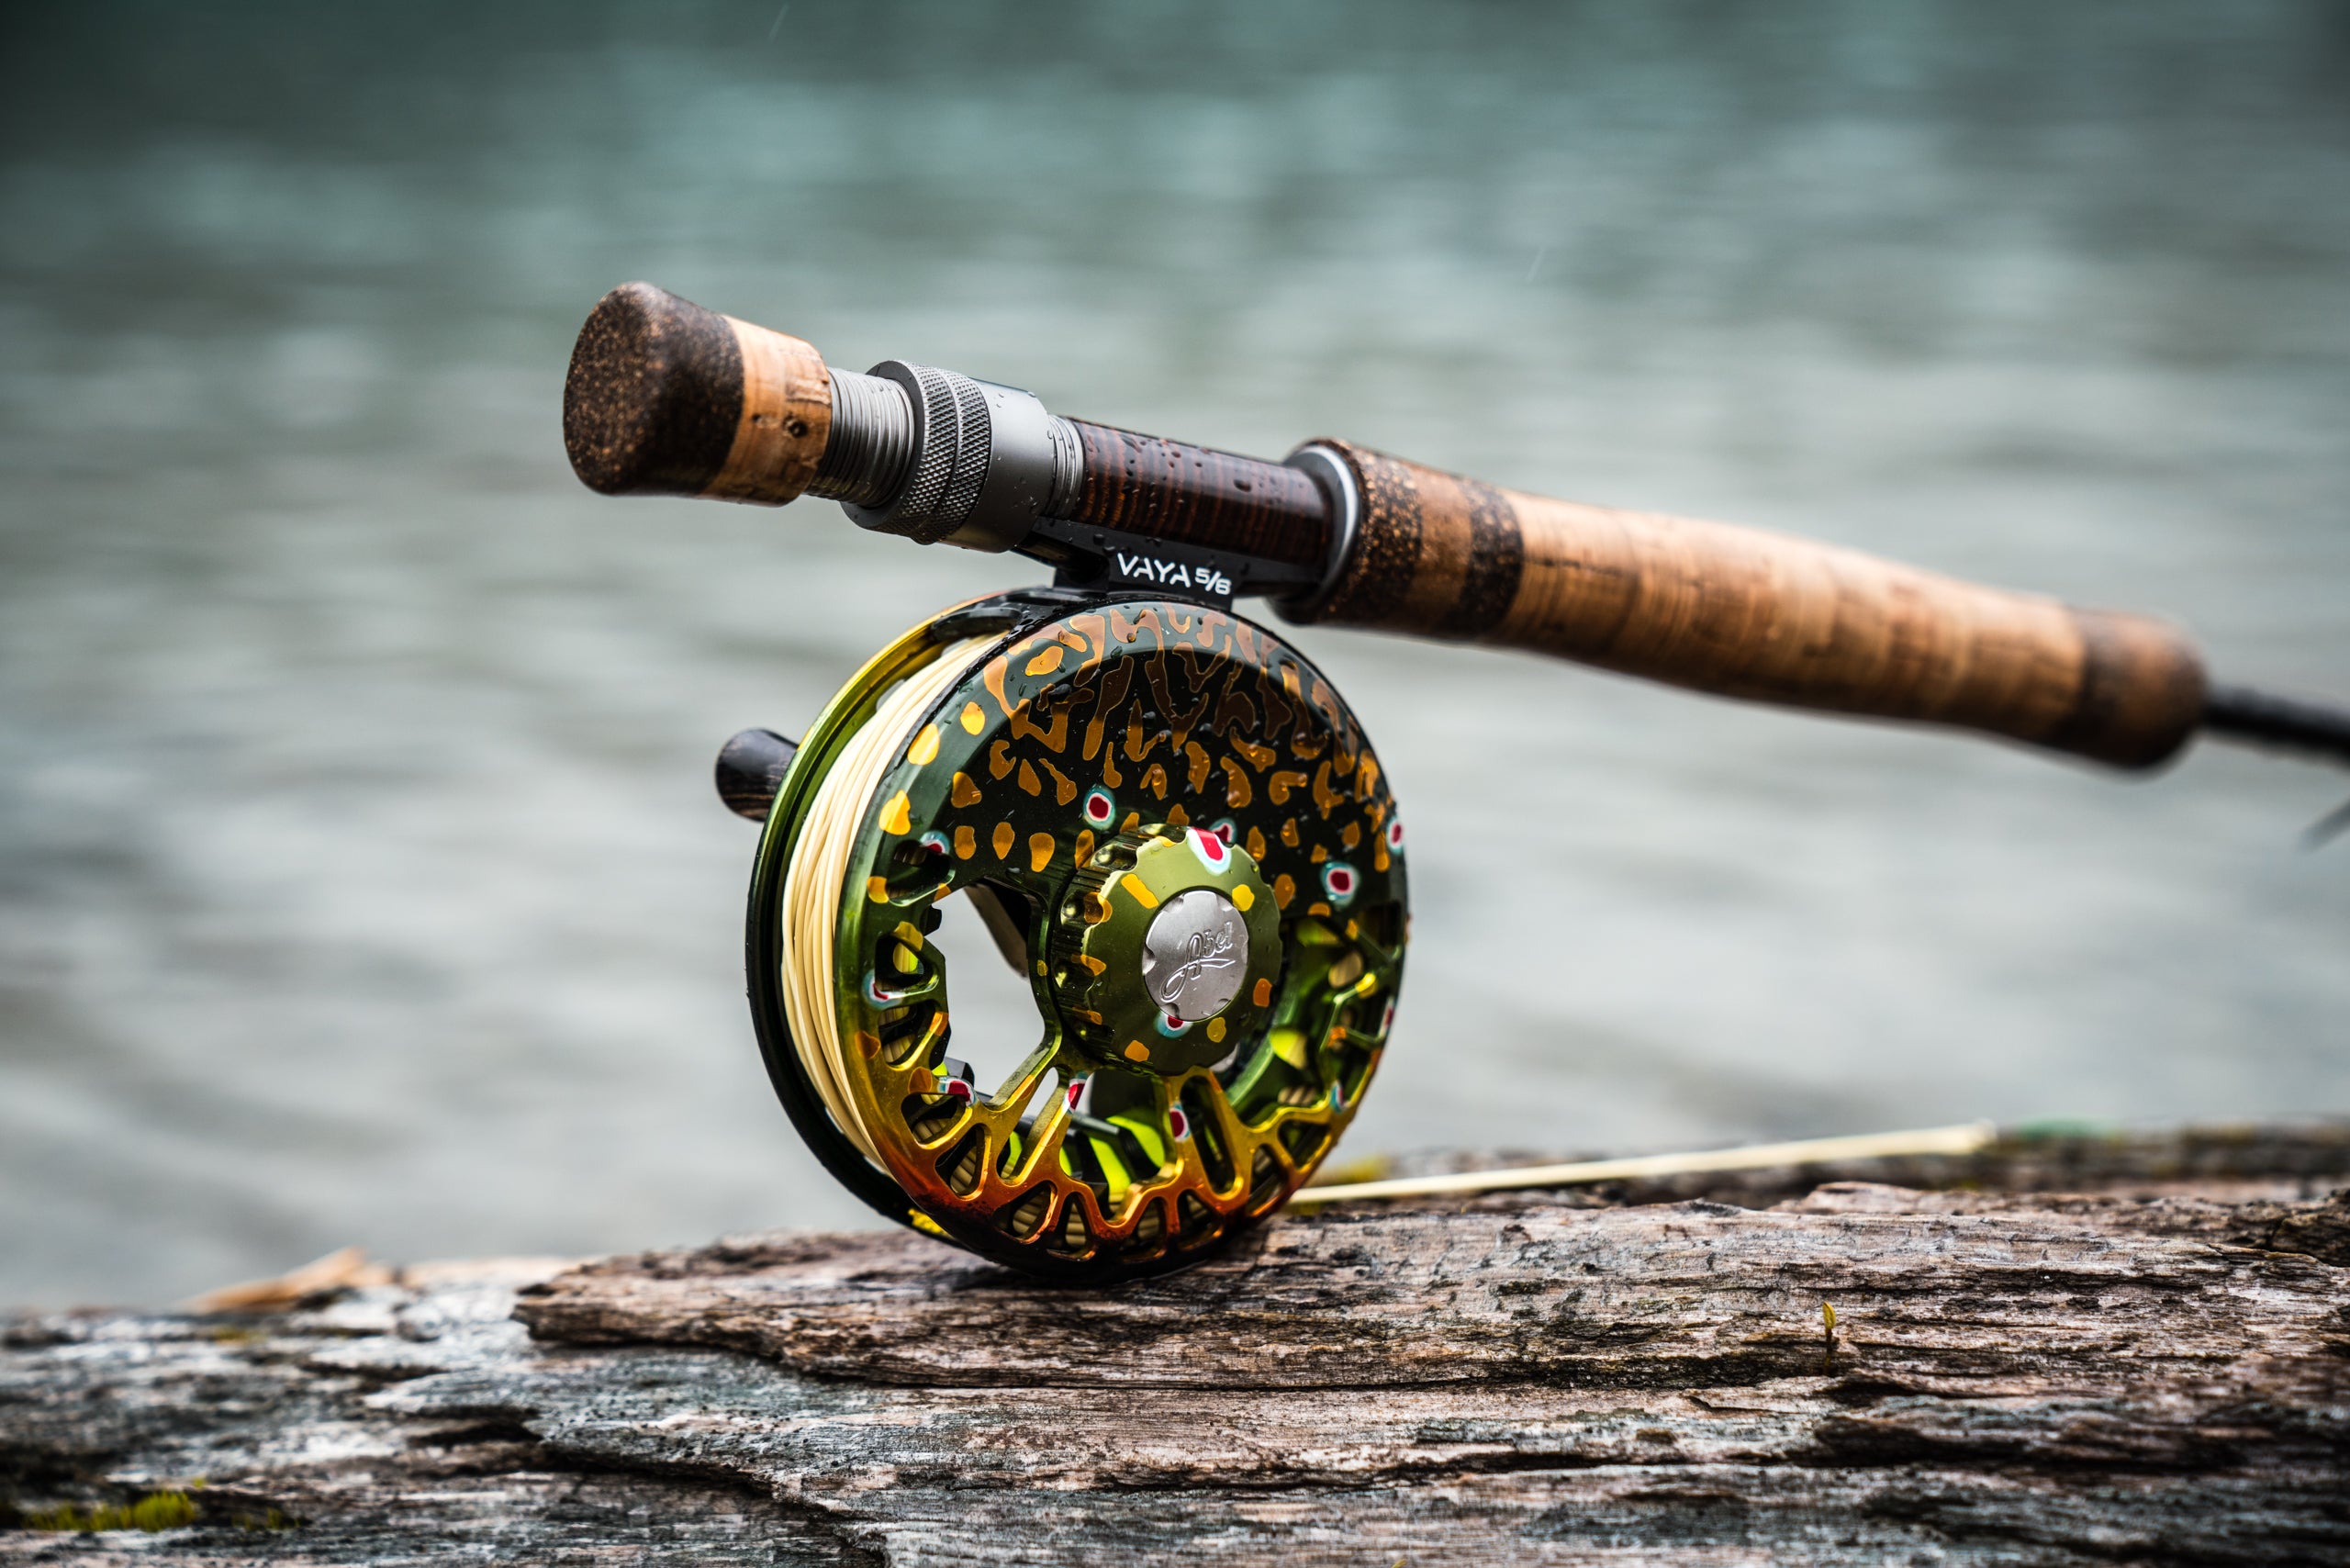 Fly Fishing Supplies & Accessories Online – Ed's Fly Shop